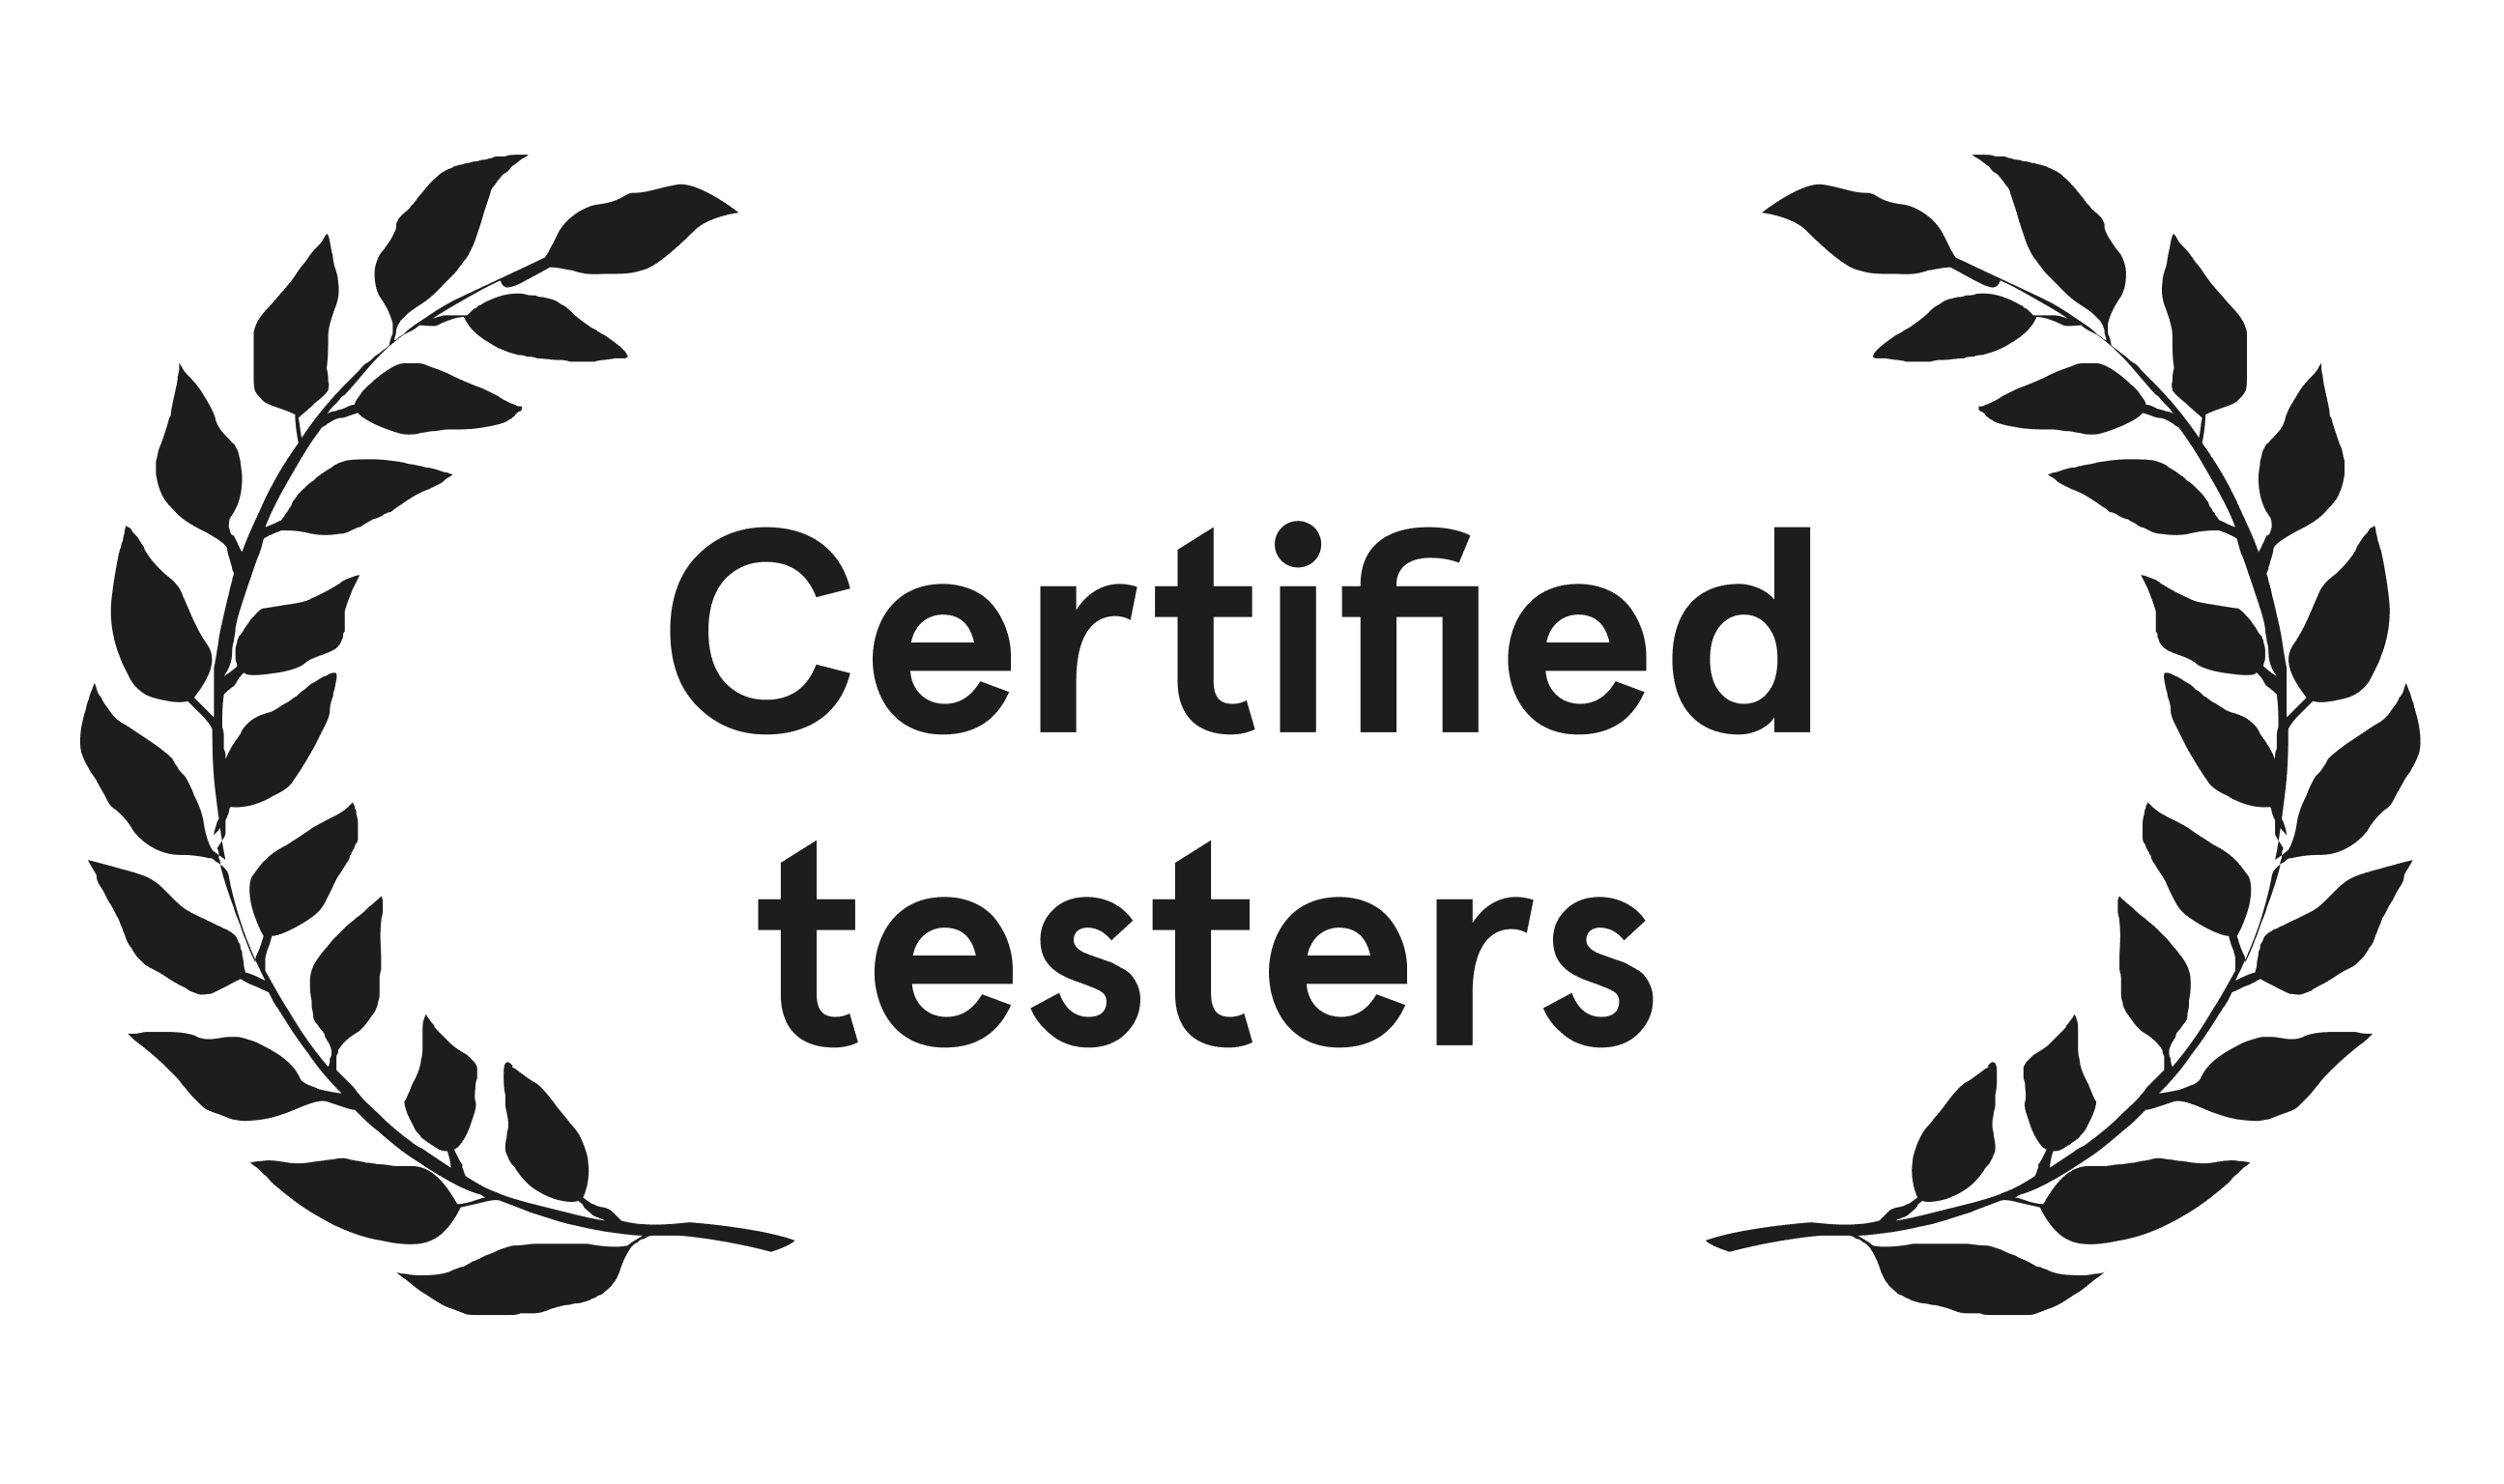 Certified testers